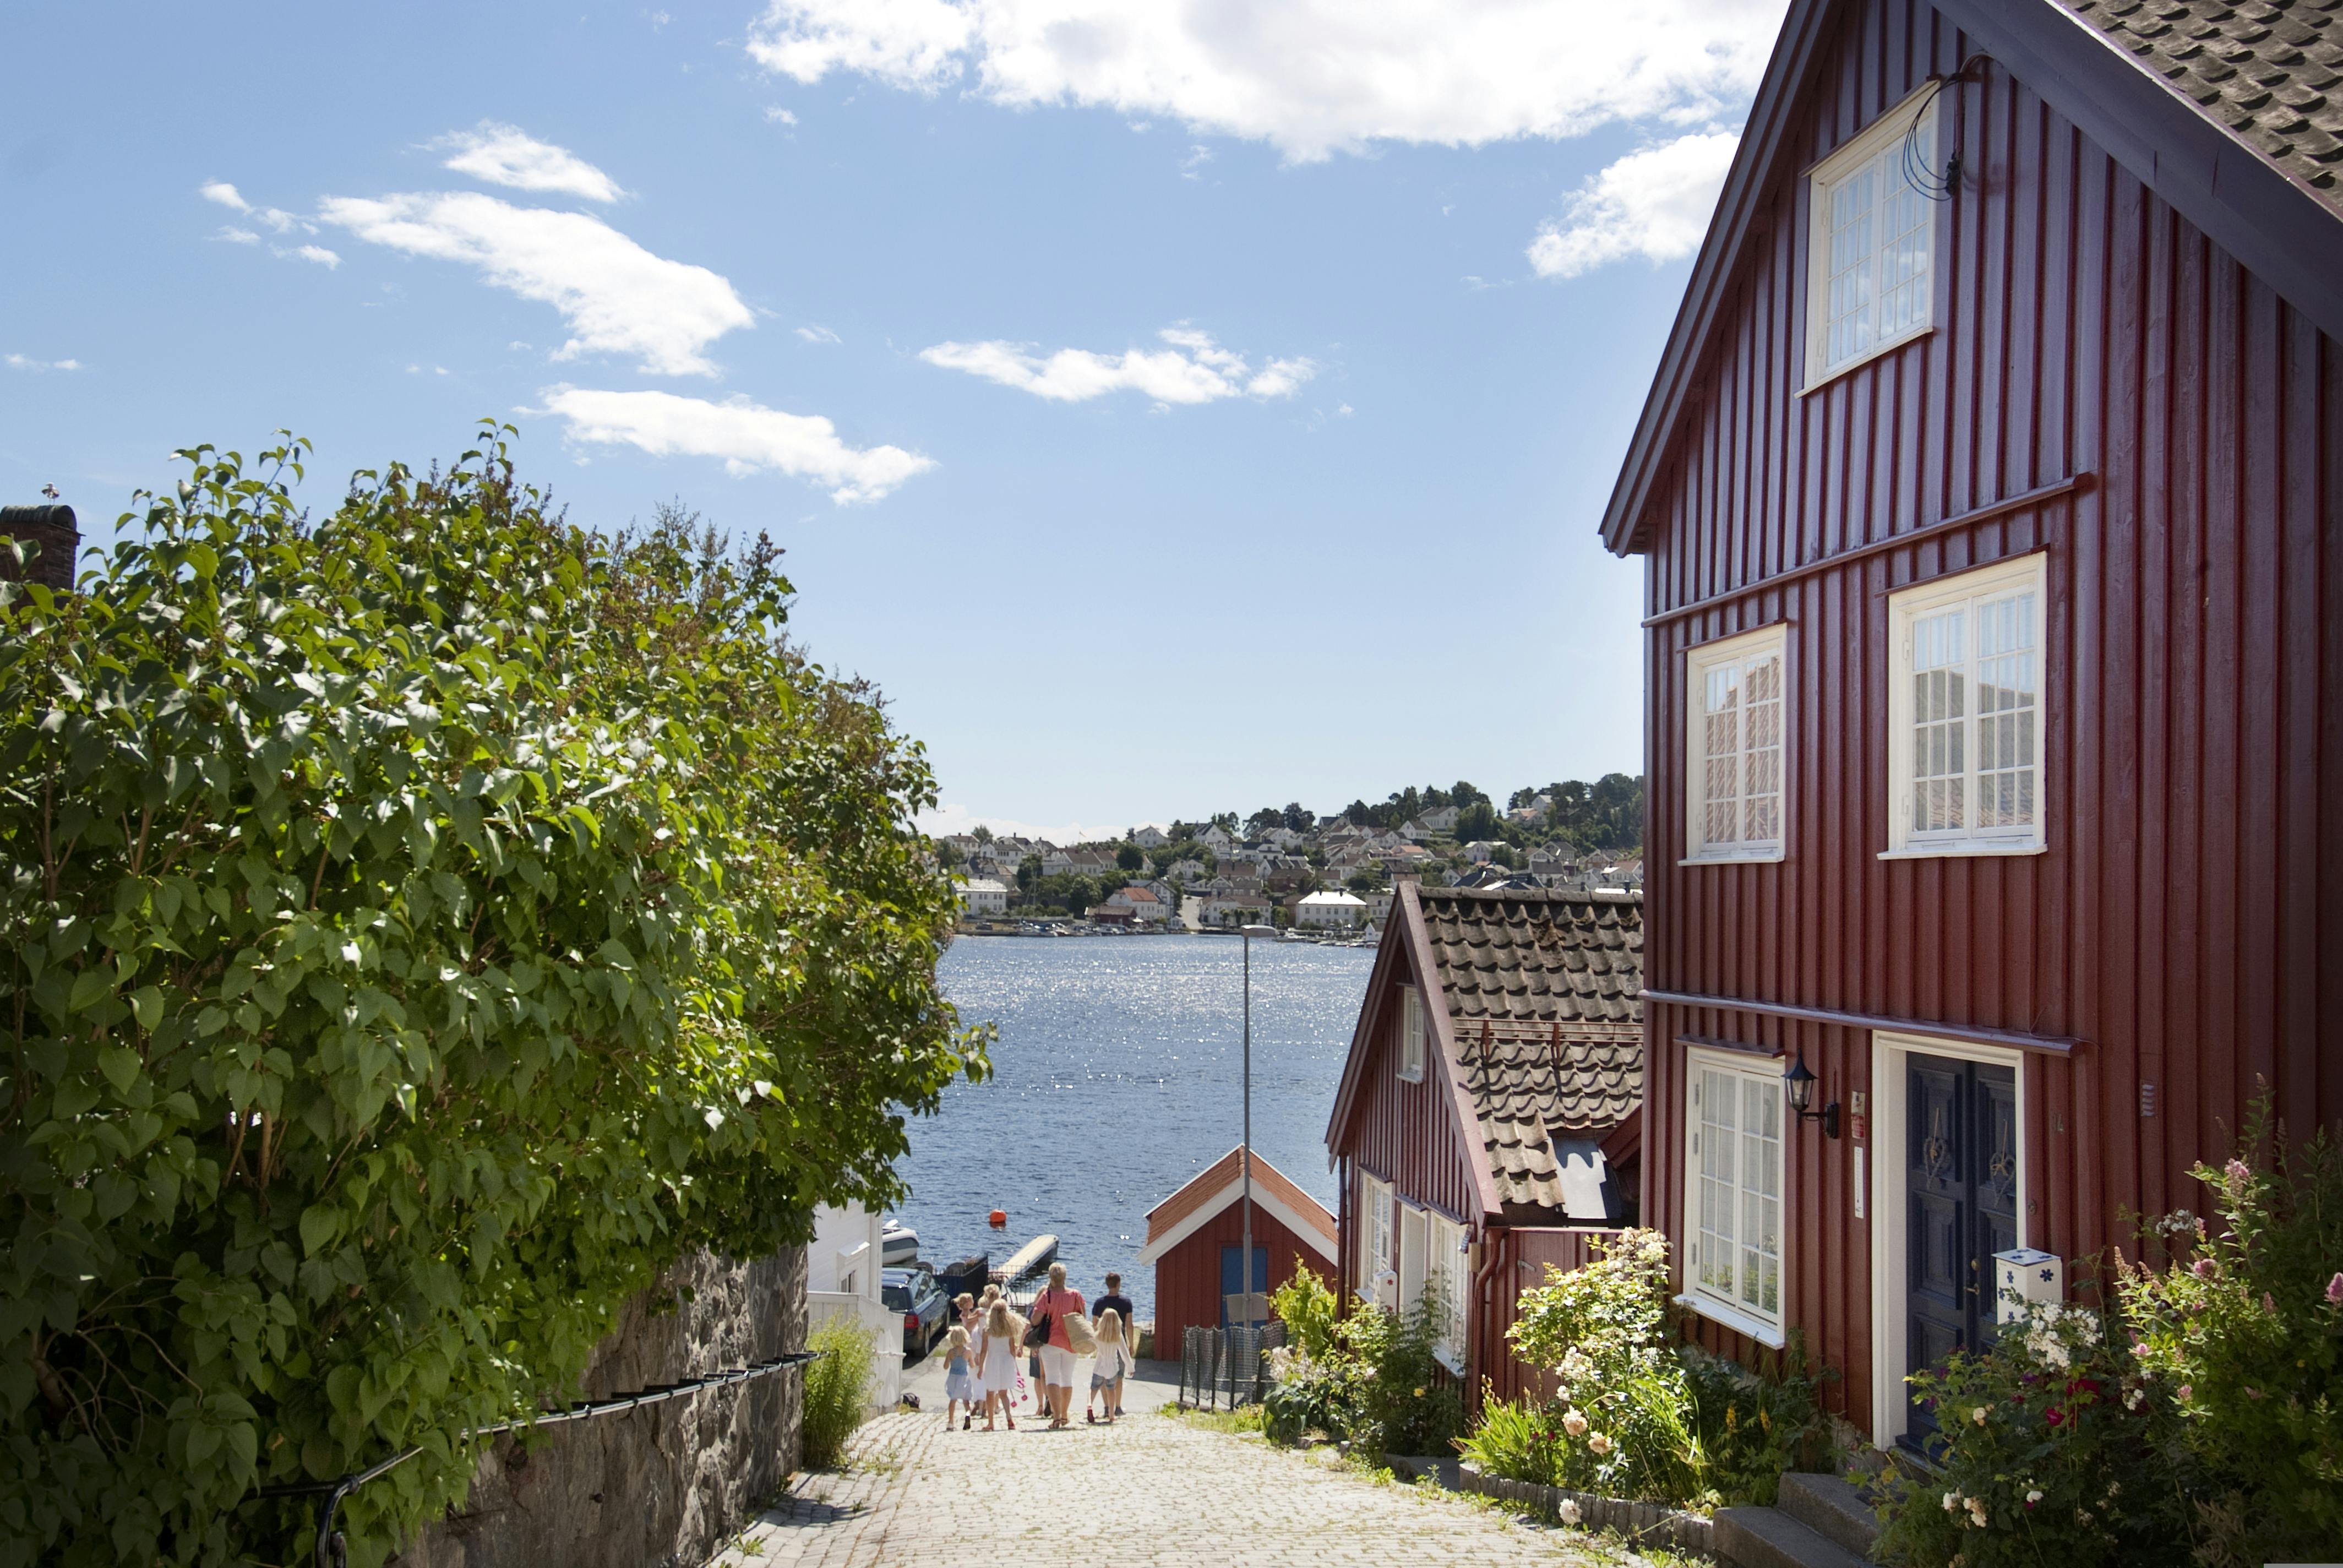 Inspiration of Tyholmen - The old town in Arendal